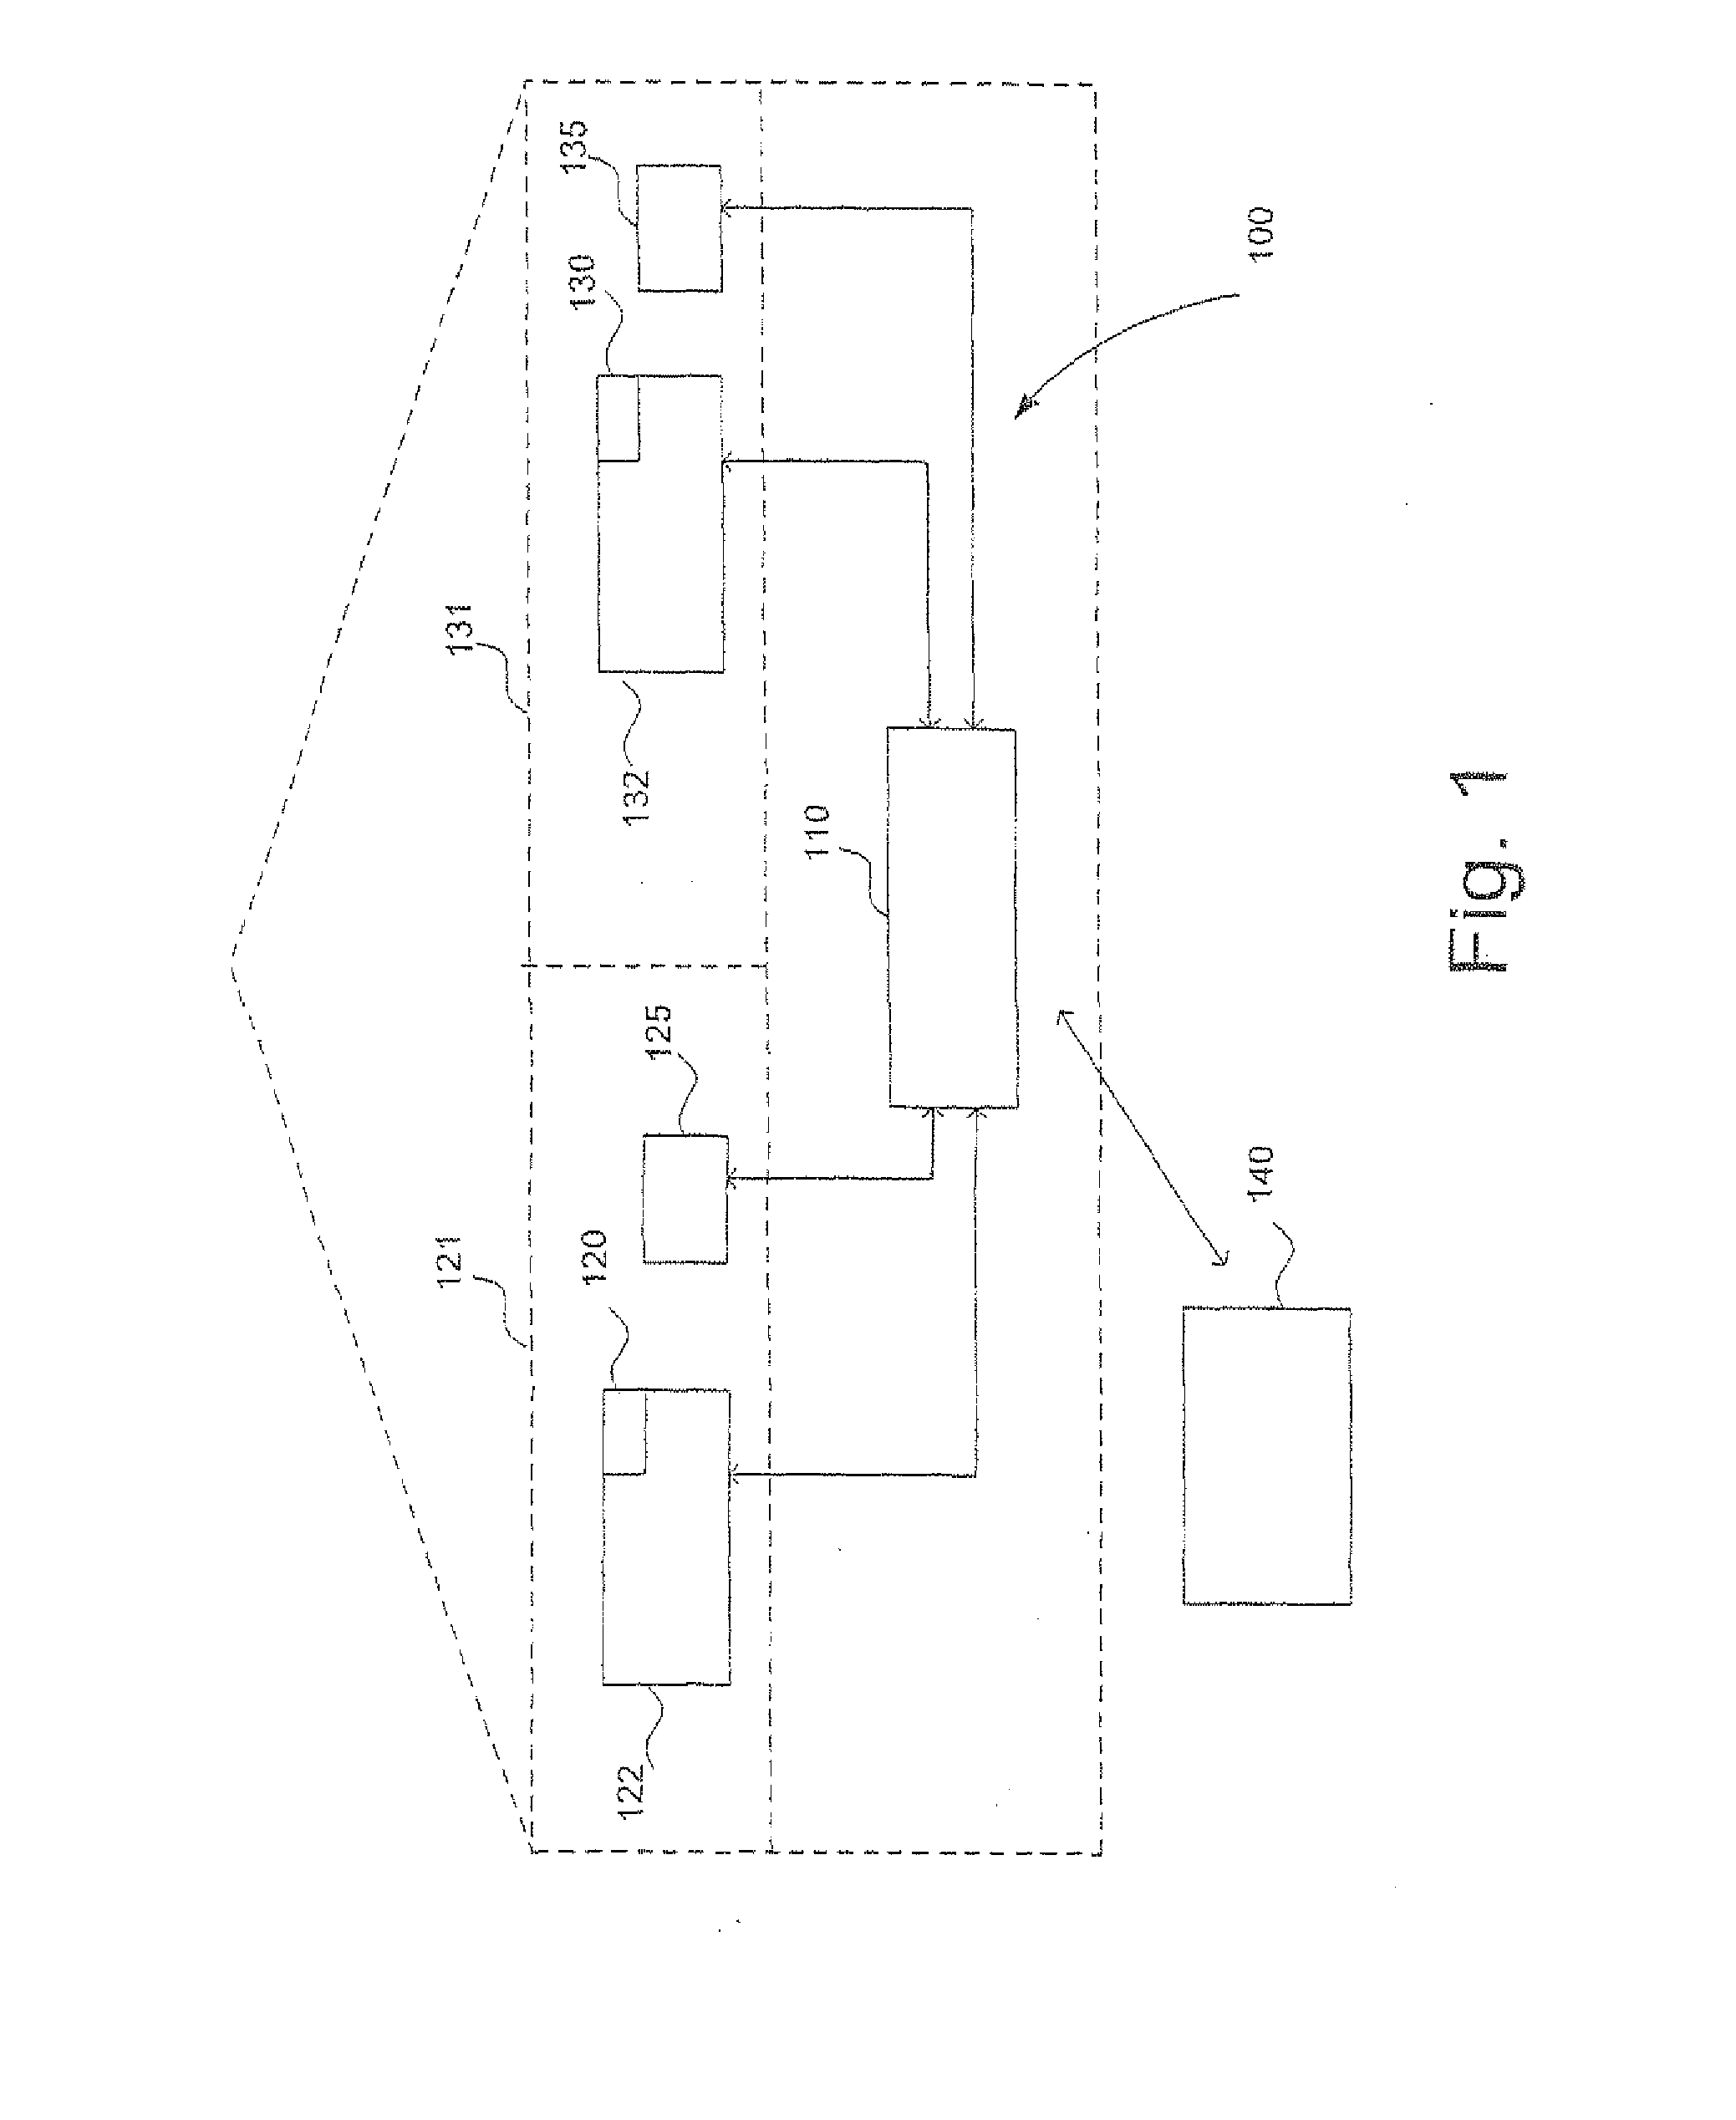 System for the central control of operational devices